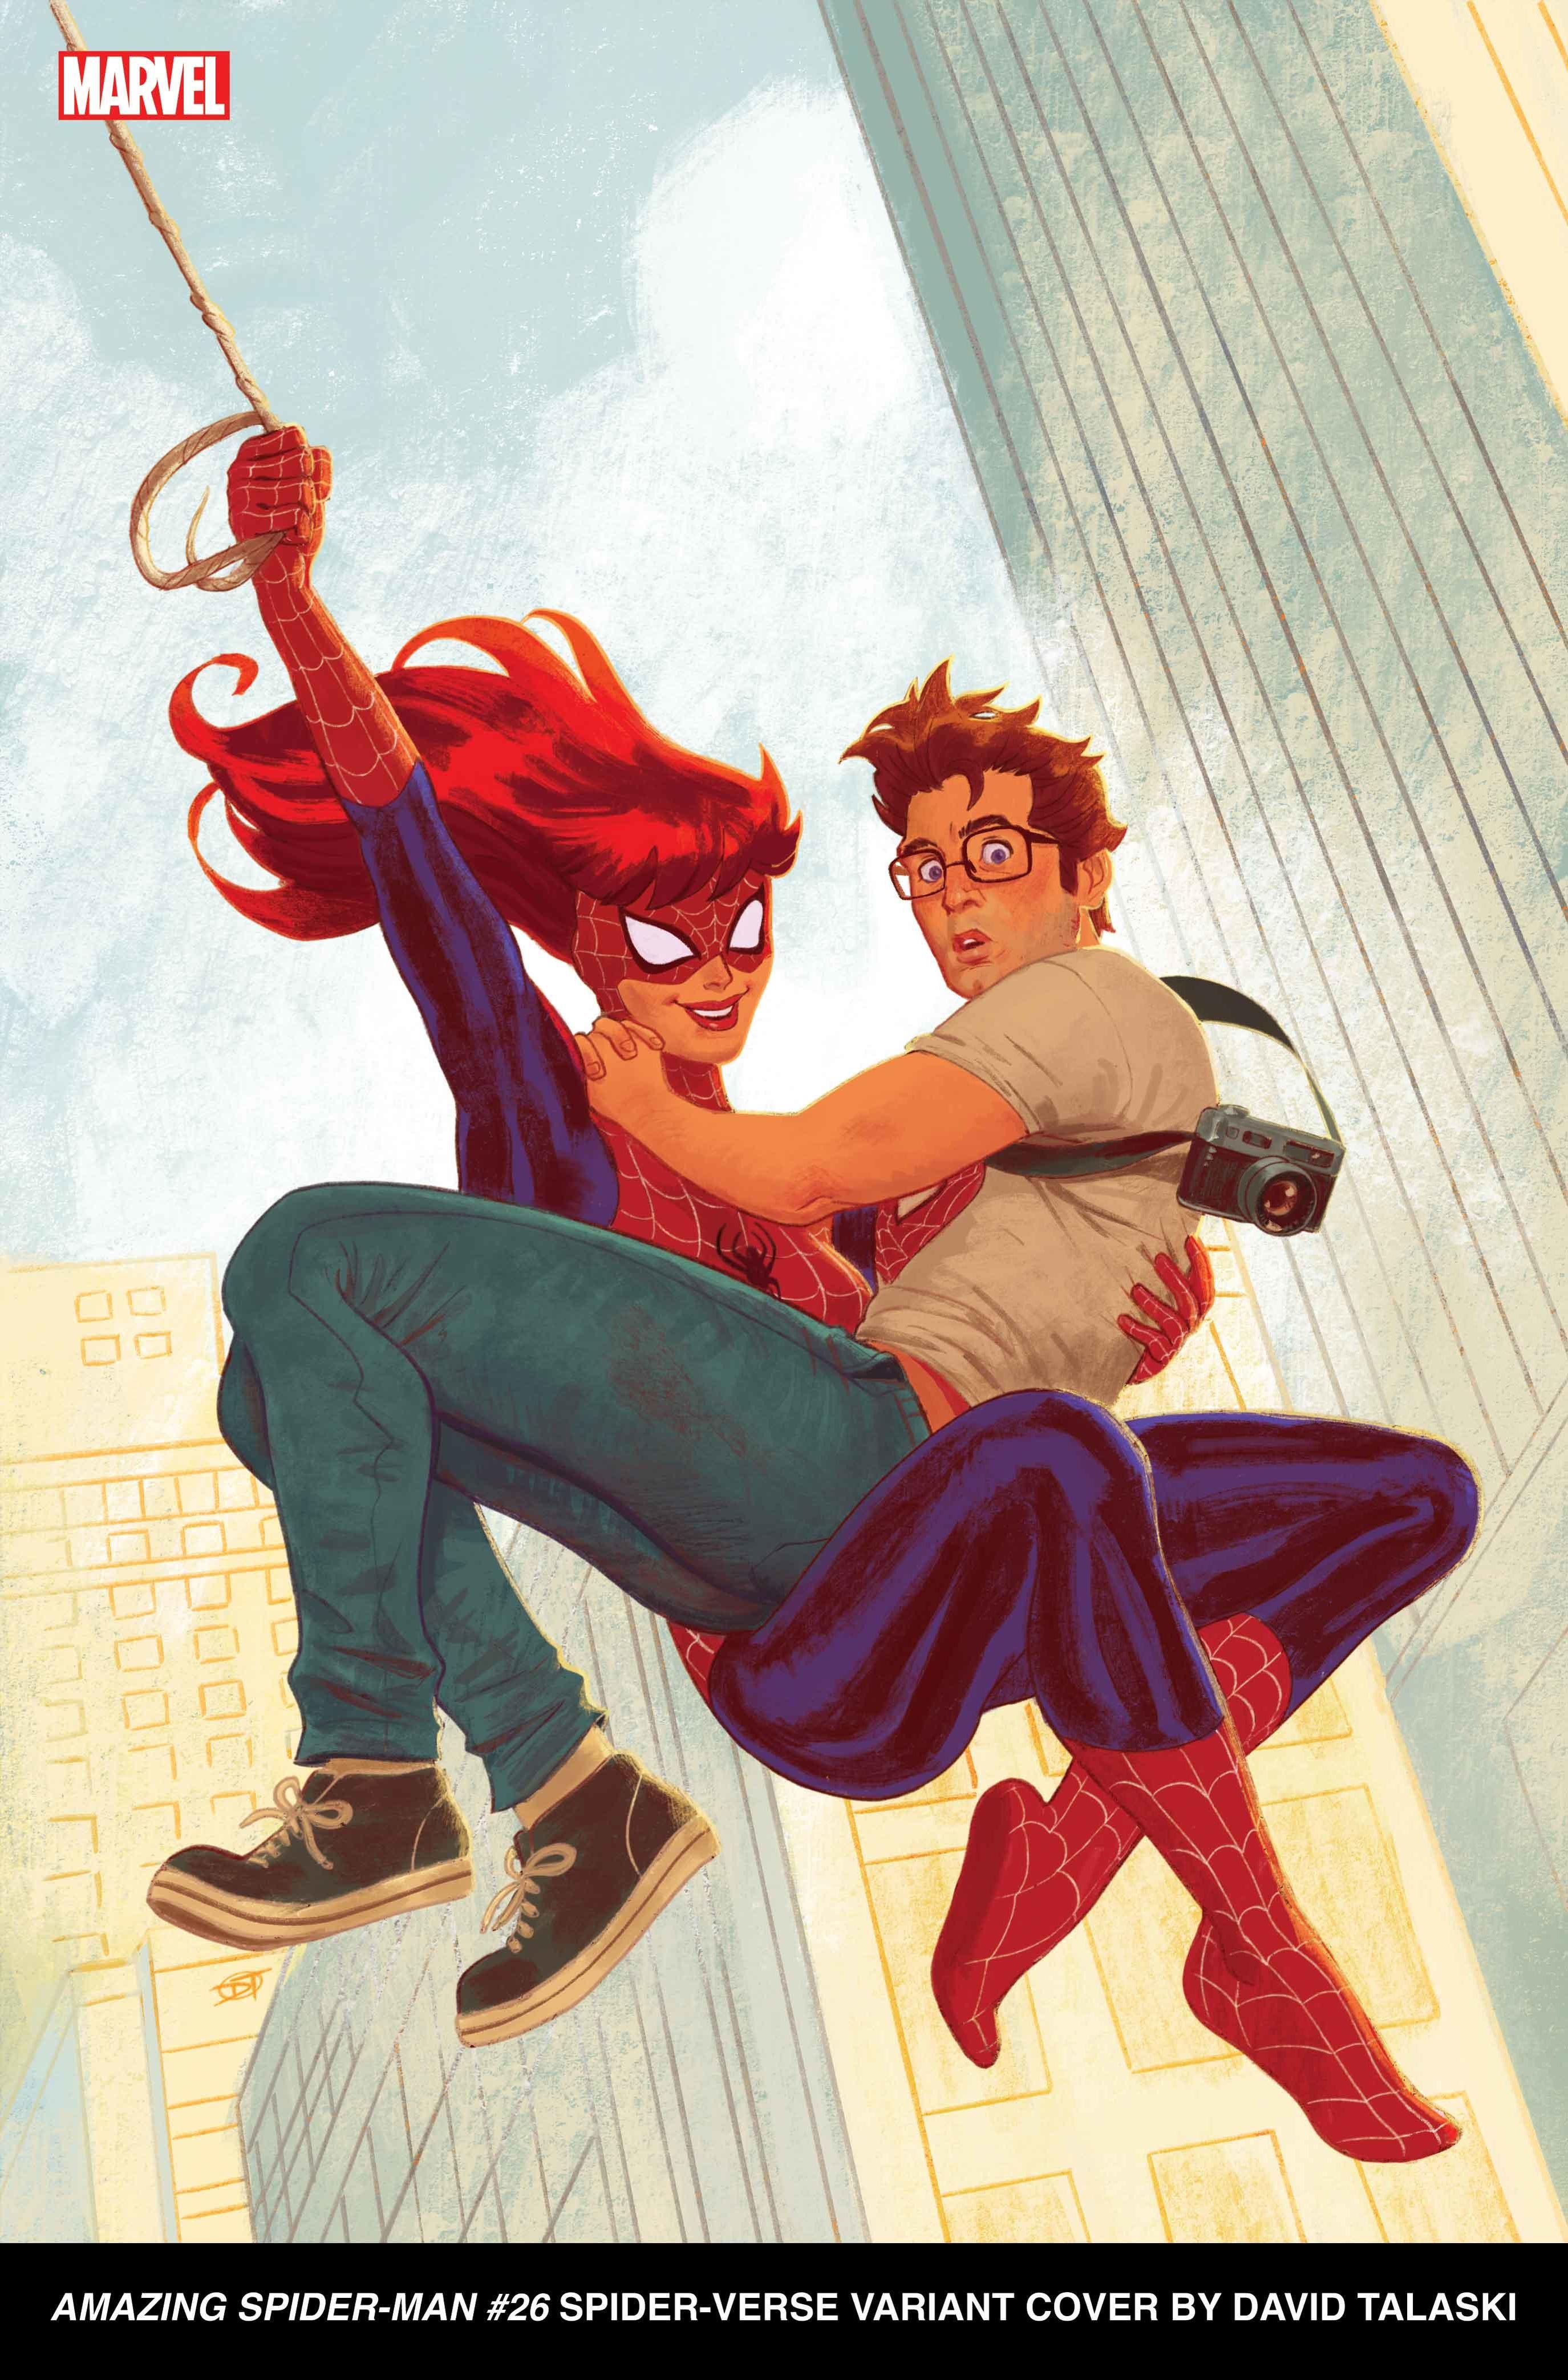 Spider-Verse Covers Turn Captain America, Wolverine, and More Into Spider-Man Variants